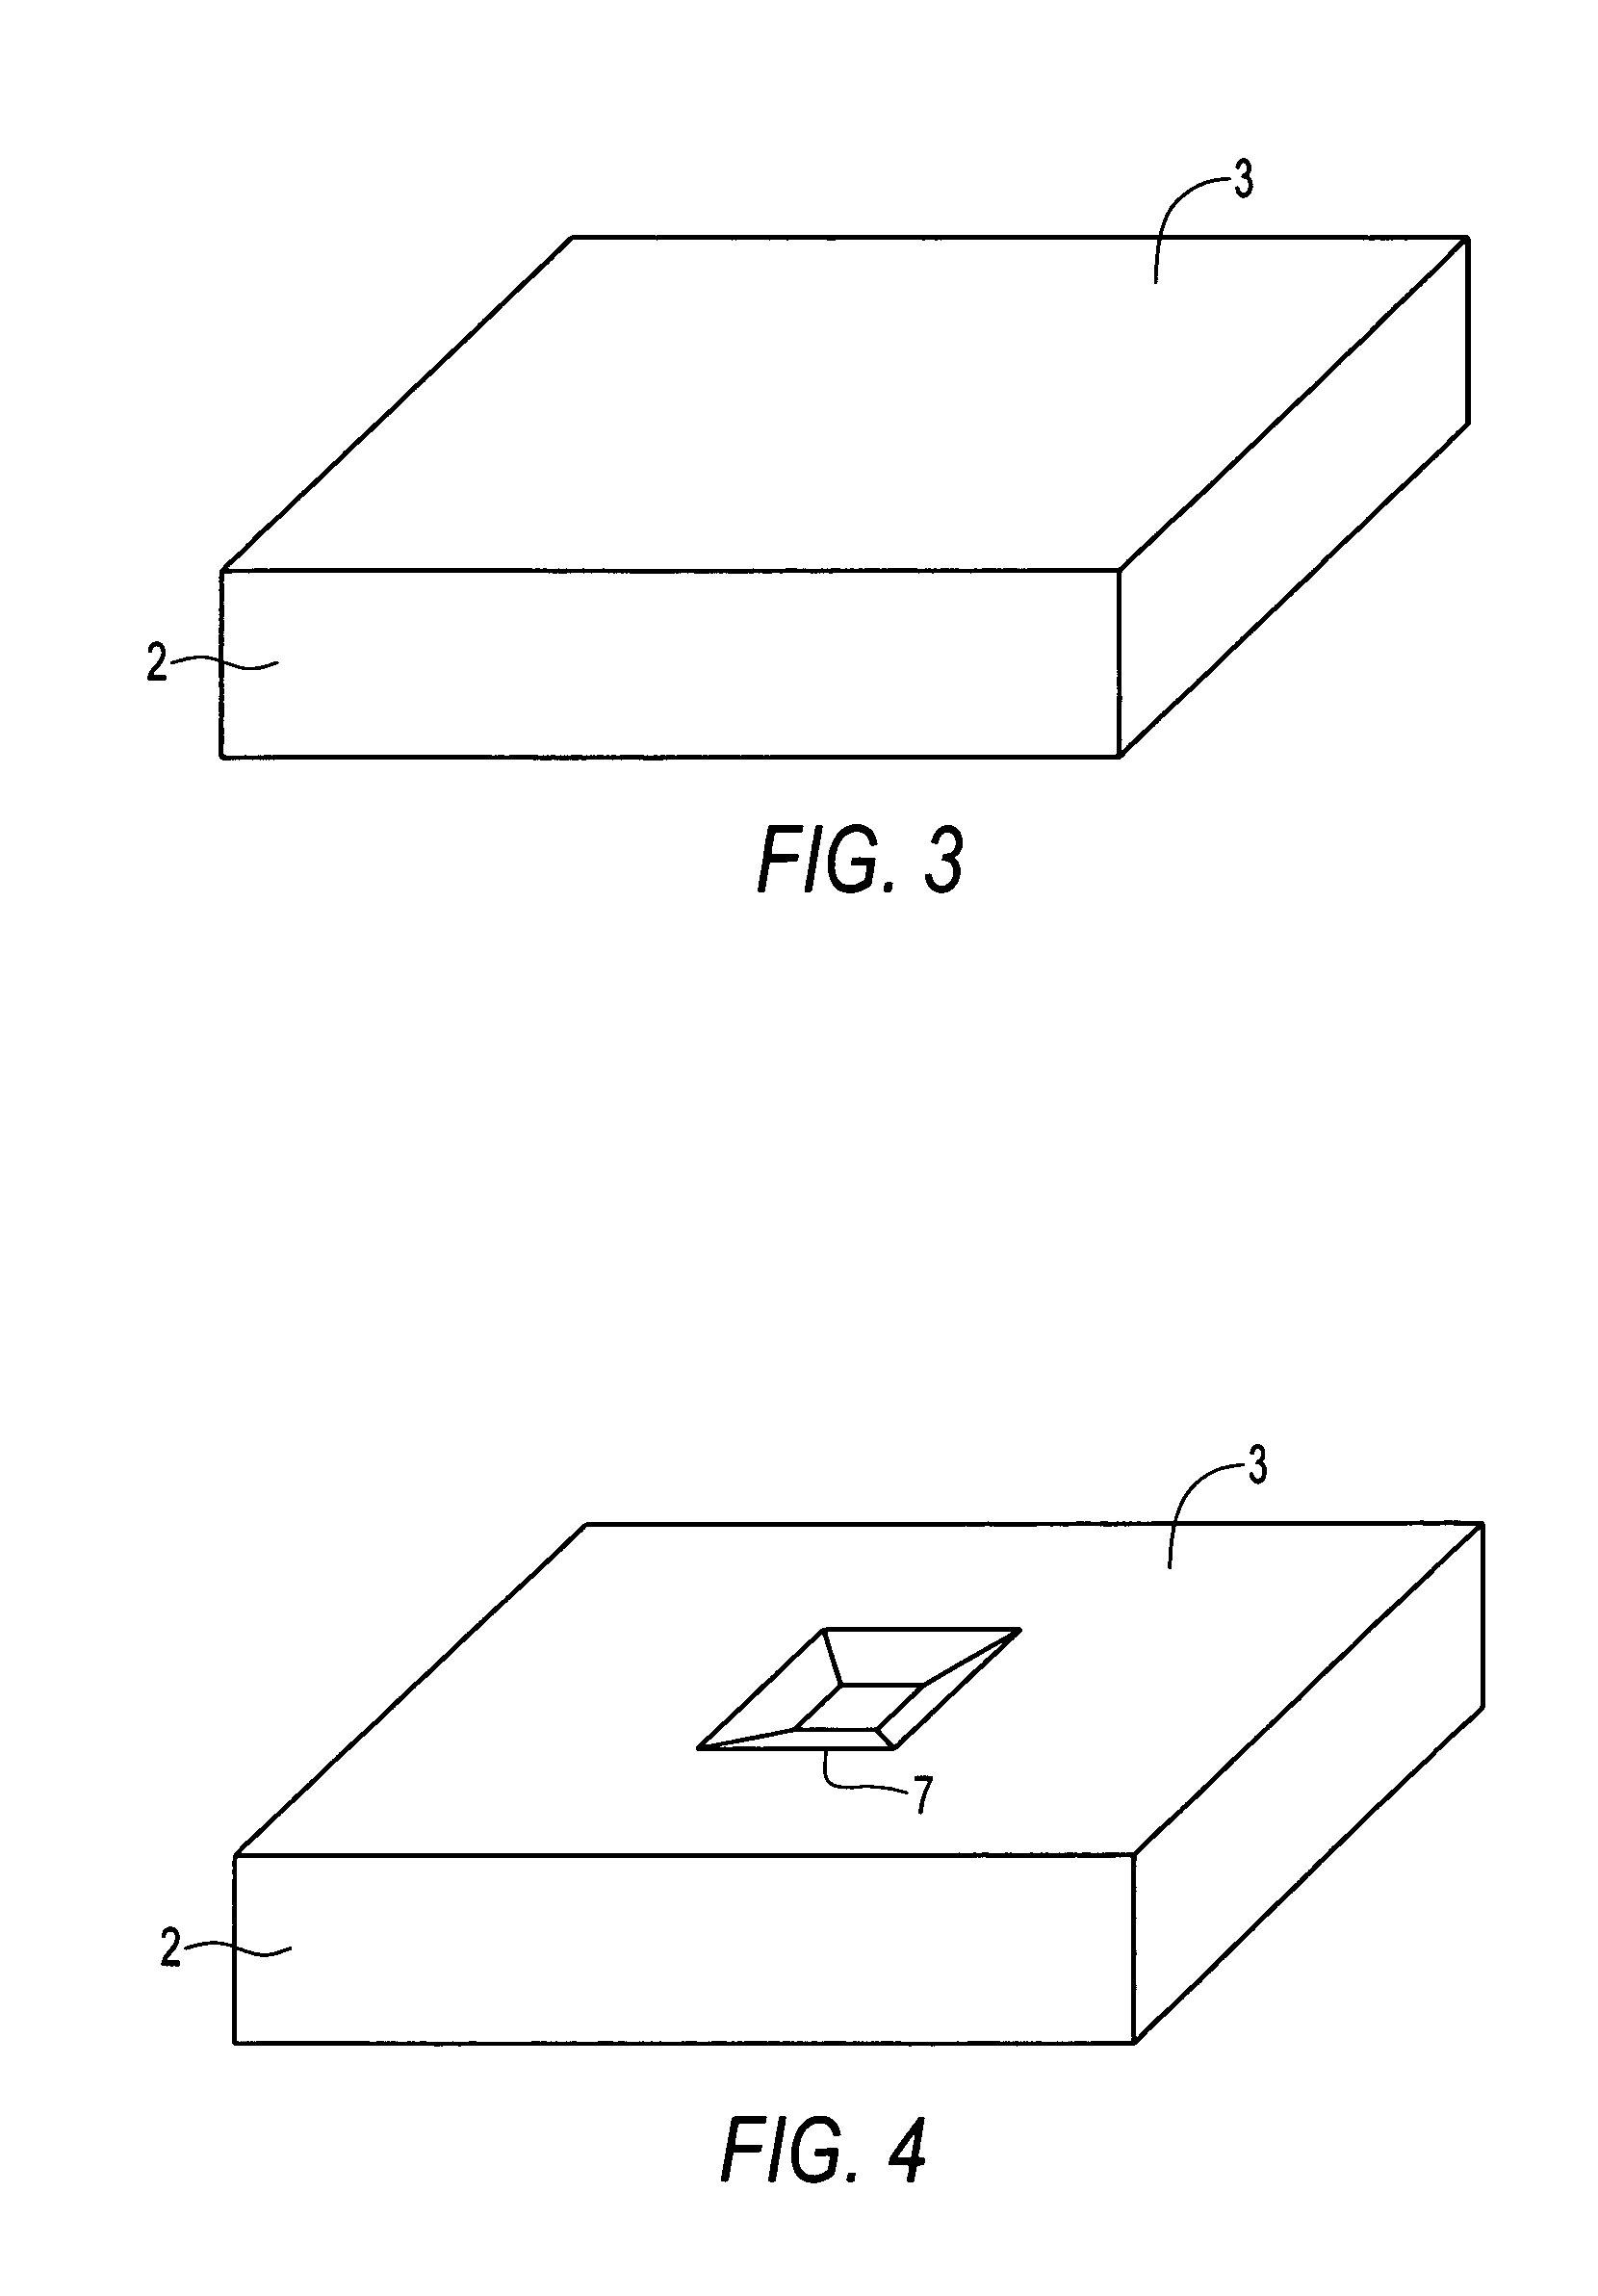 Thermal fluid flow sensor and method of forming same technical field